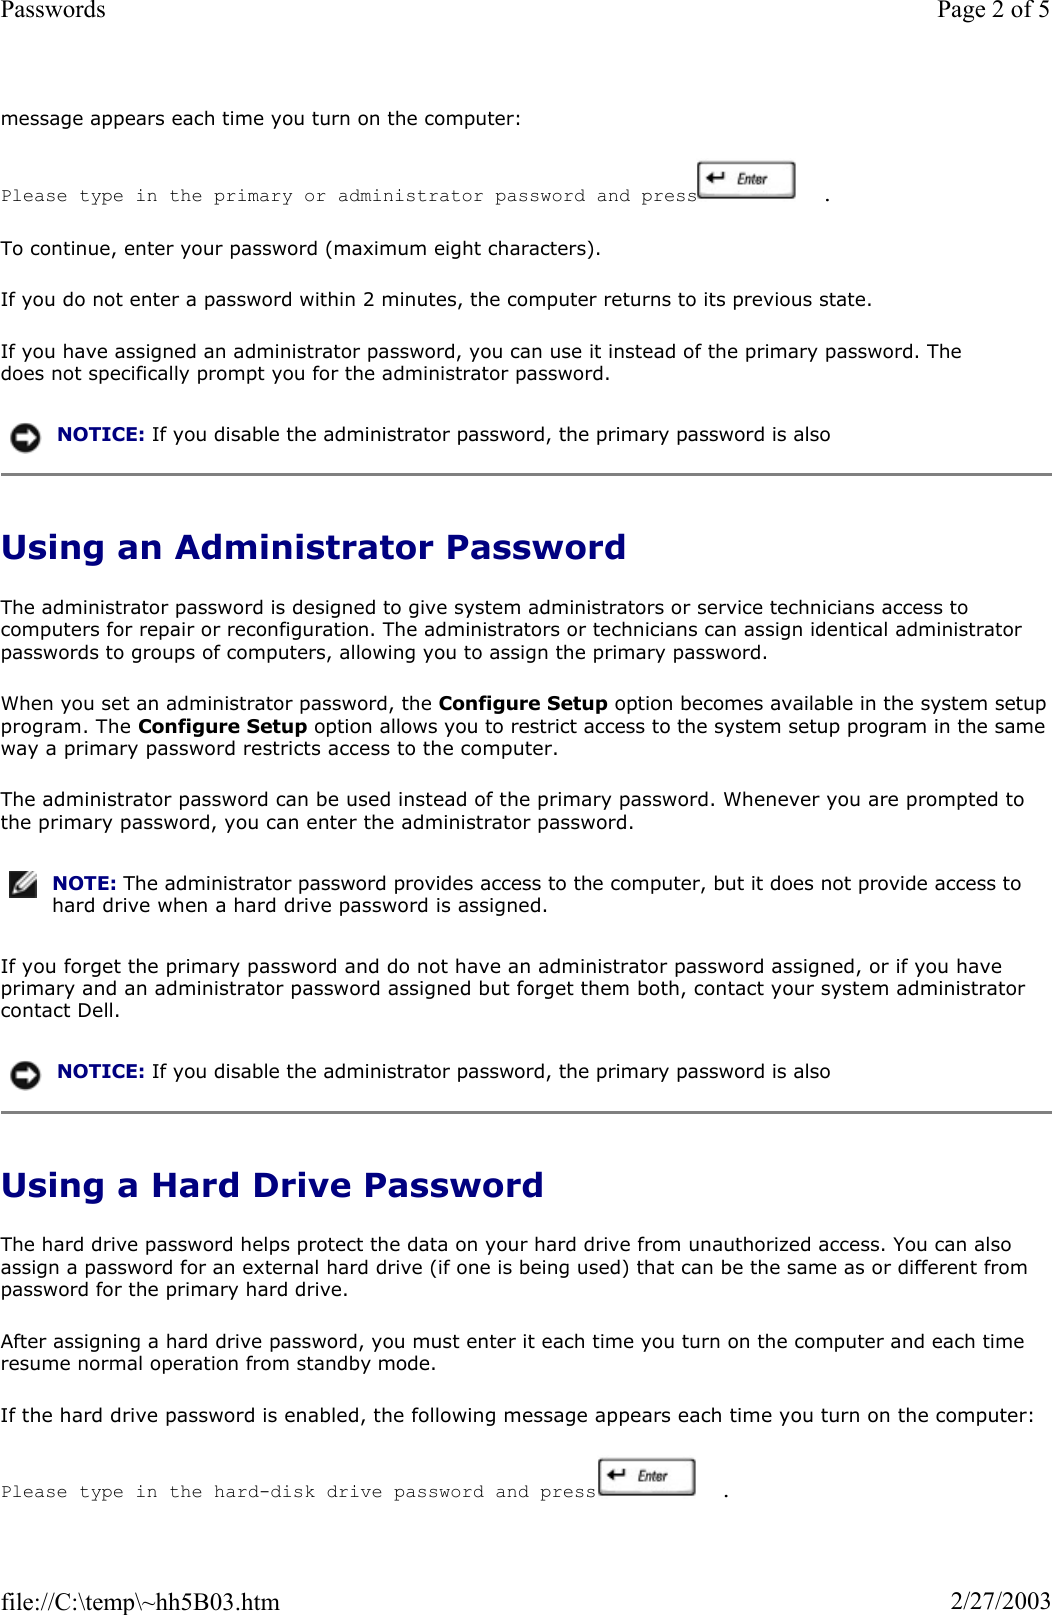 message appears each time you turn on the computer: Please type in the primary or administrator password and press   .  To continue, enter your password (maximum eight characters). If you do not enter a password within 2 minutes, the computer returns to its previous state. If you have assigned an administrator password, you can use it instead of the primary password. The does not specifically prompt you for the administrator password. Using an Administrator Password The administrator password is designed to give system administrators or service technicians access to computers for repair or reconfiguration. The administrators or technicians can assign identical administrator passwords to groups of computers, allowing you to assign the primary password. When you set an administrator password, the Configure Setup option becomes available in the system setupprogram. The Configure Setup option allows you to restrict access to the system setup program in the same way a primary password restricts access to the computer. The administrator password can be used instead of the primary password. Whenever you are prompted to the primary password, you can enter the administrator password. If you forget the primary password and do not have an administrator password assigned, or if you have primary and an administrator password assigned but forget them both, contact your system administrator contact Dell. Using a Hard Drive Password The hard drive password helps protect the data on your hard drive from unauthorized access. You can also assign a password for an external hard drive (if one is being used) that can be the same as or different from password for the primary hard drive. After assigning a hard drive password, you must enter it each time you turn on the computer and each time resume normal operation from standby mode. If the hard drive password is enabled, the following message appears each time you turn on the computer: Please type in the hard-disk drive password and press   .  NOTICE: If you disable the administrator password, the primary password is also NOTE: The administrator password provides access to the computer, but it does not provide access to hard drive when a hard drive password is assigned. NOTICE: If you disable the administrator password, the primary password is also Page 2 of 5Passwords2/27/2003file://C:\temp\~hh5B03.htm